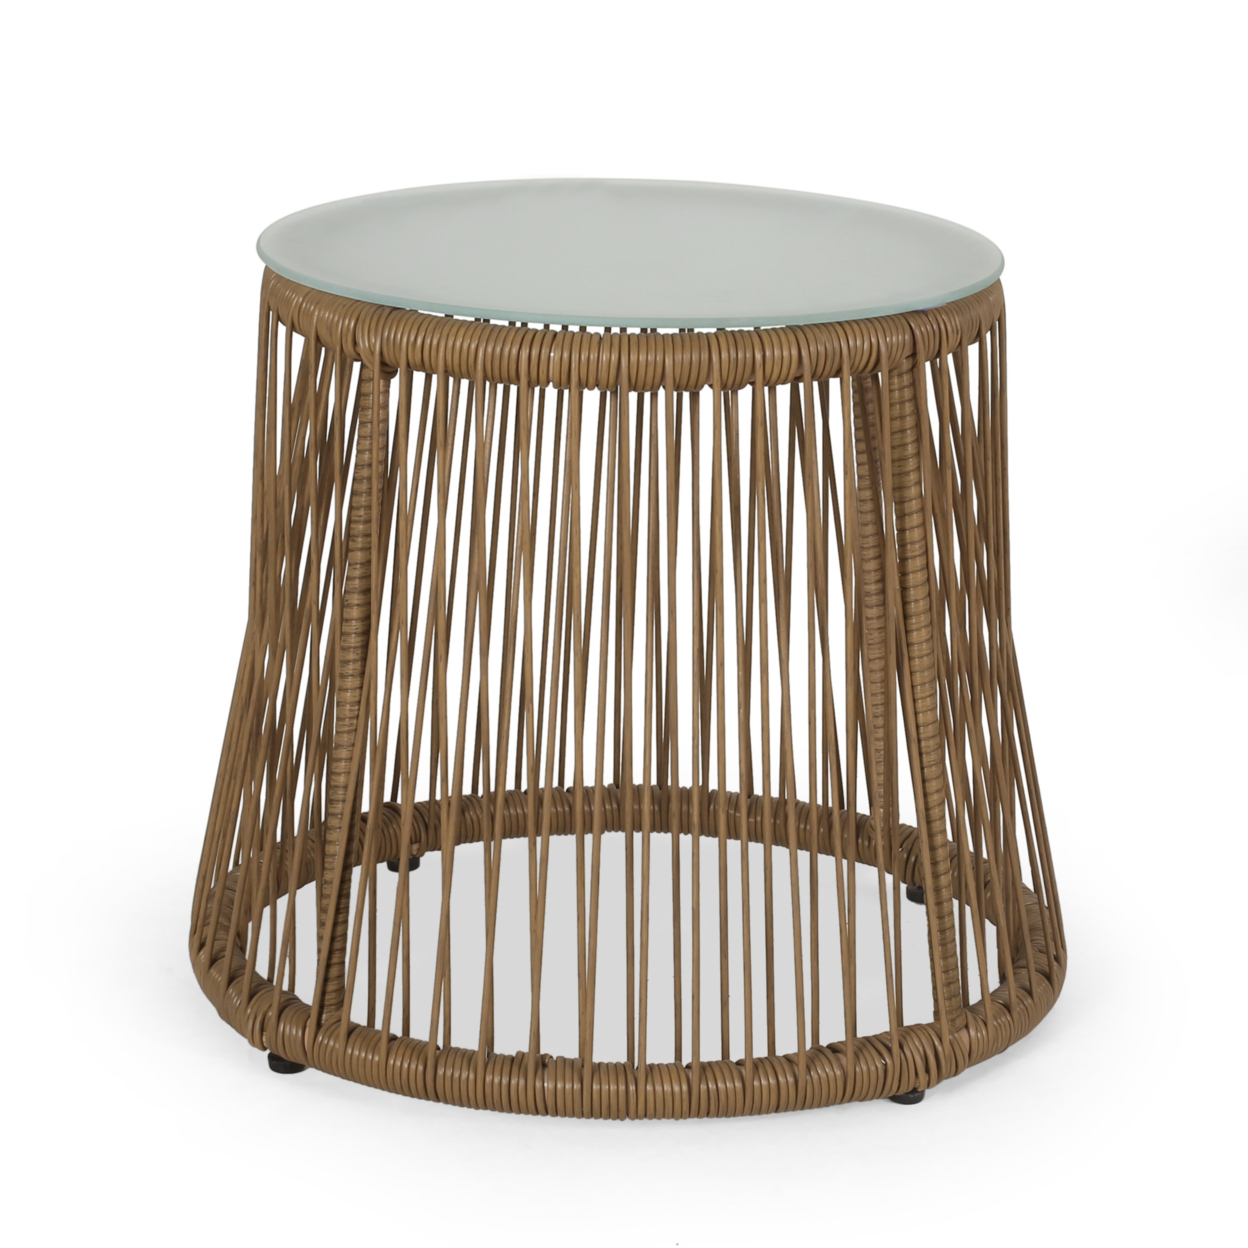 Helmville Outdoor Wicker Side Table With Glass Top, Light Brown